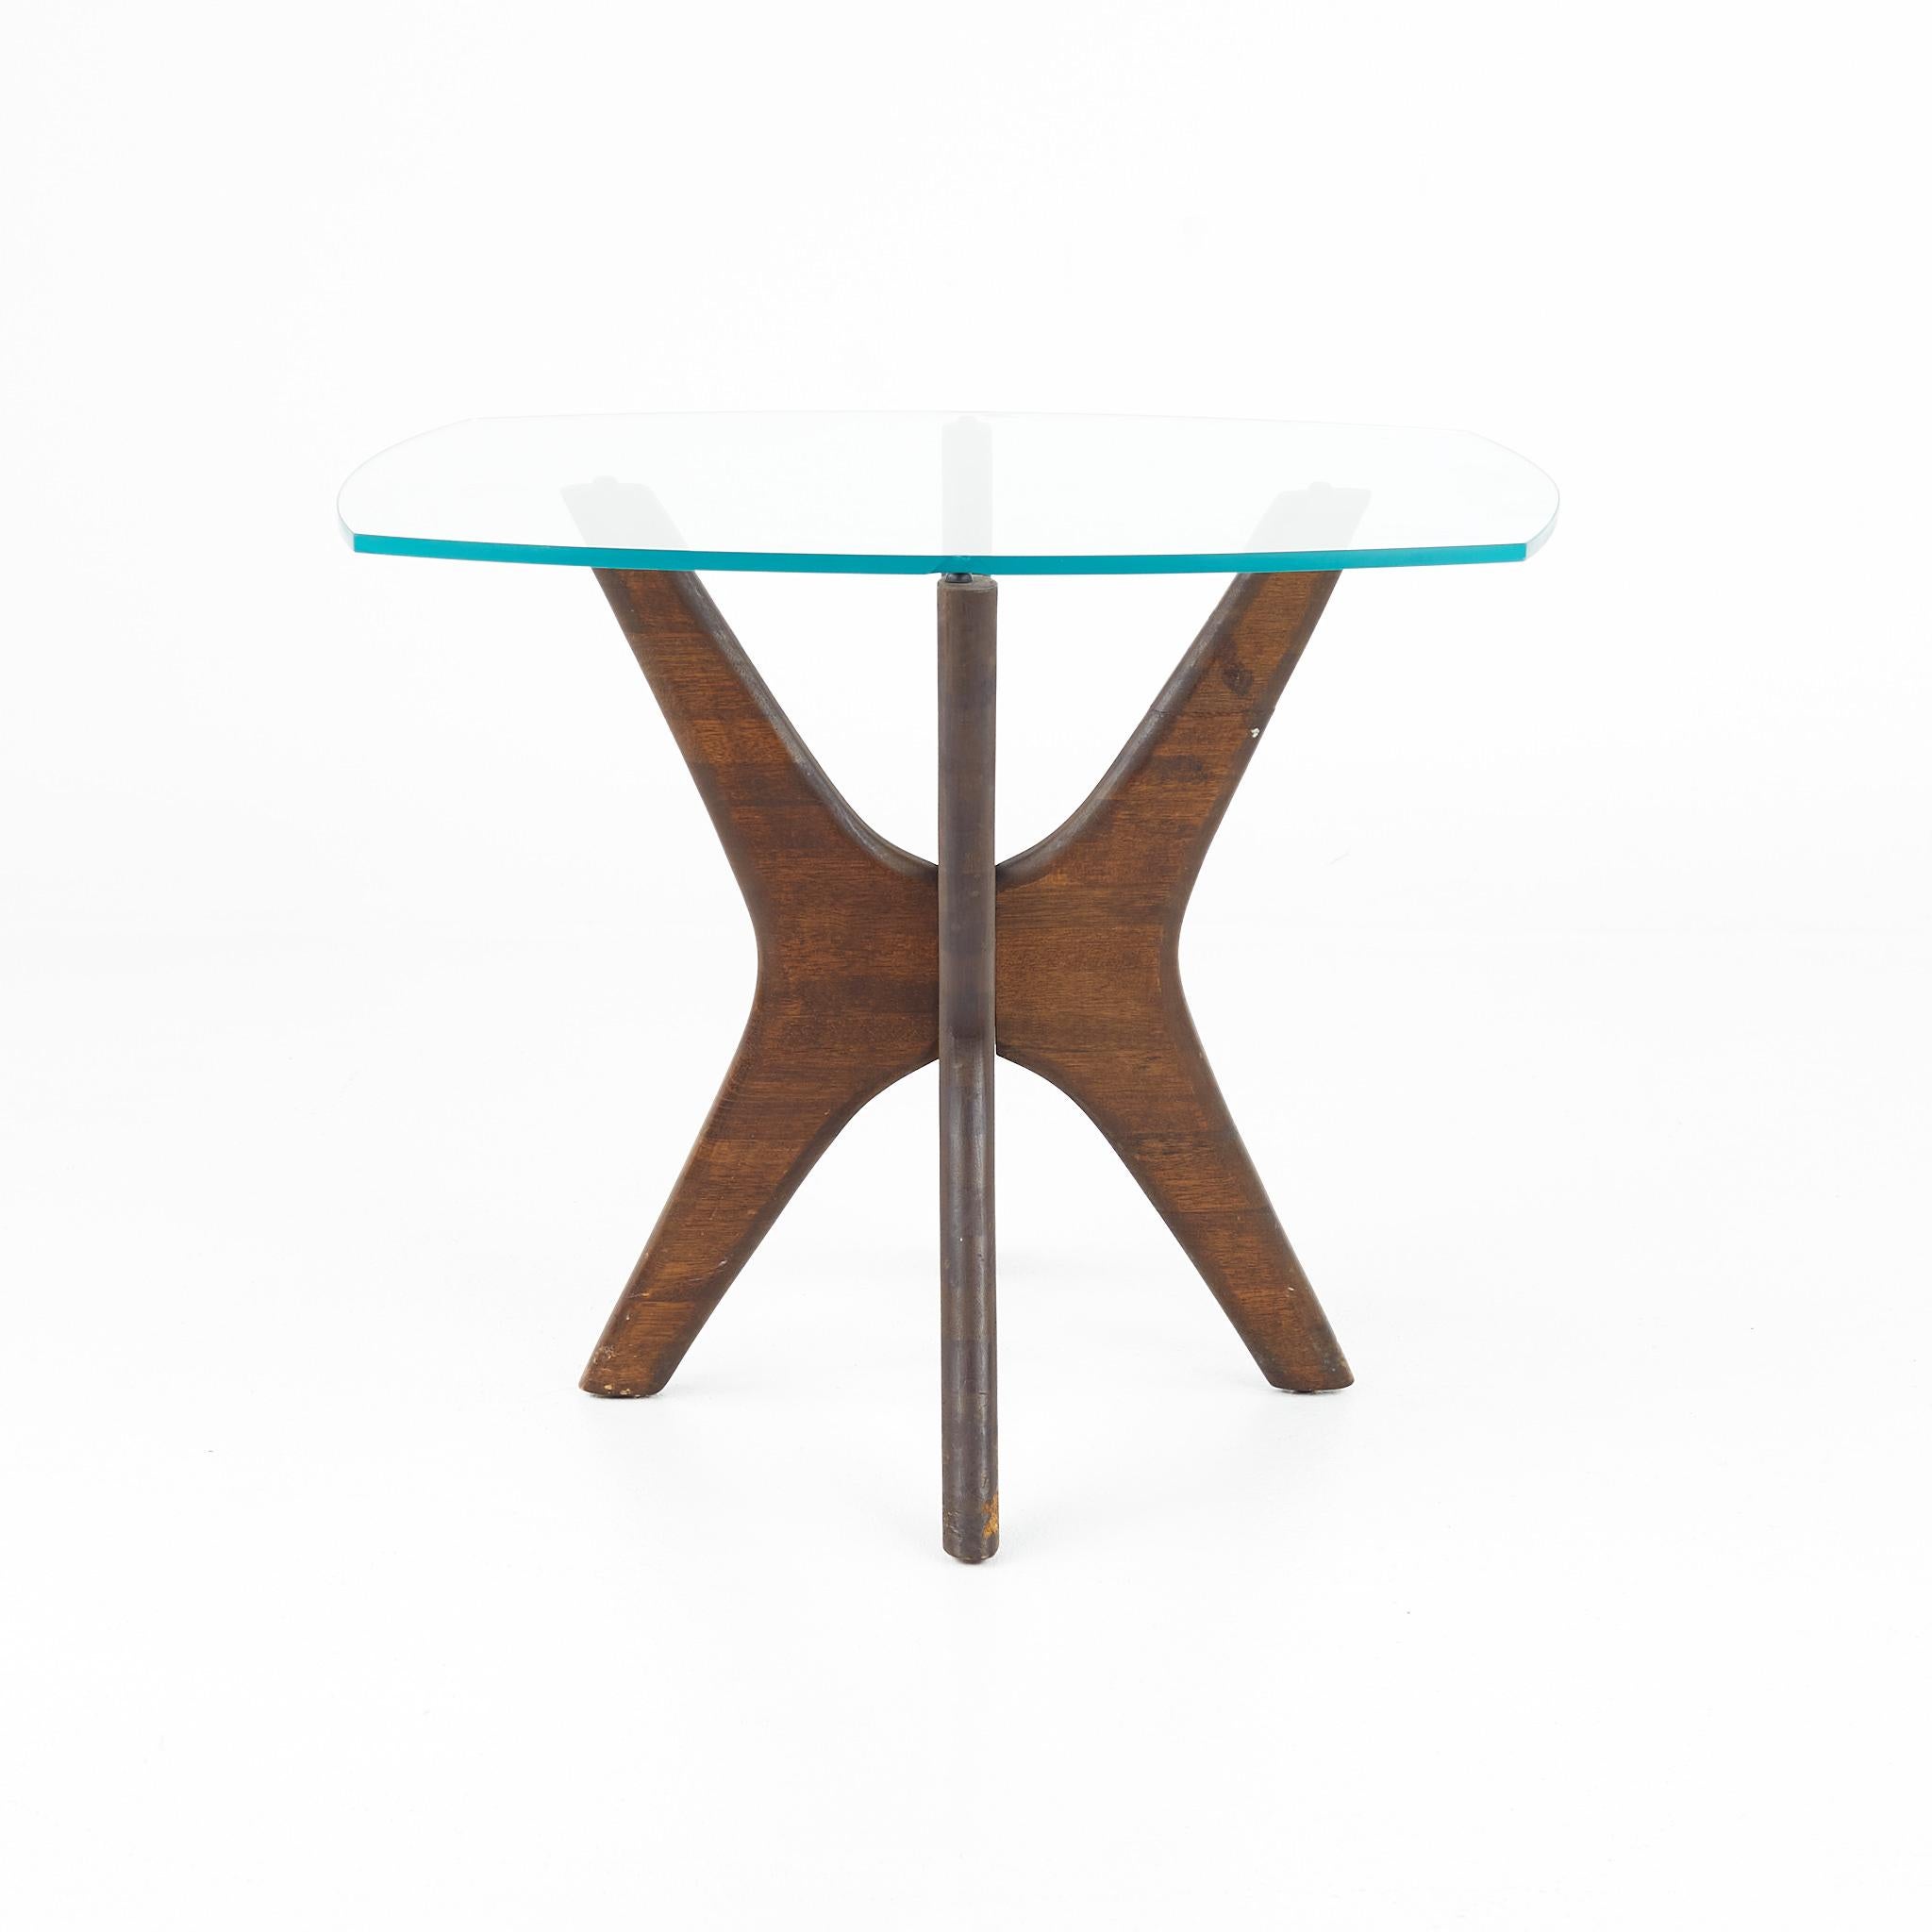 Adrian Pearsall Jacks mid century walnut side end table

This table measures: 24 wide x 20 deep x 19 inches high

?All pieces of furniture can be had in what we call restored vintage condition. That means the piece is restored upon purchase so